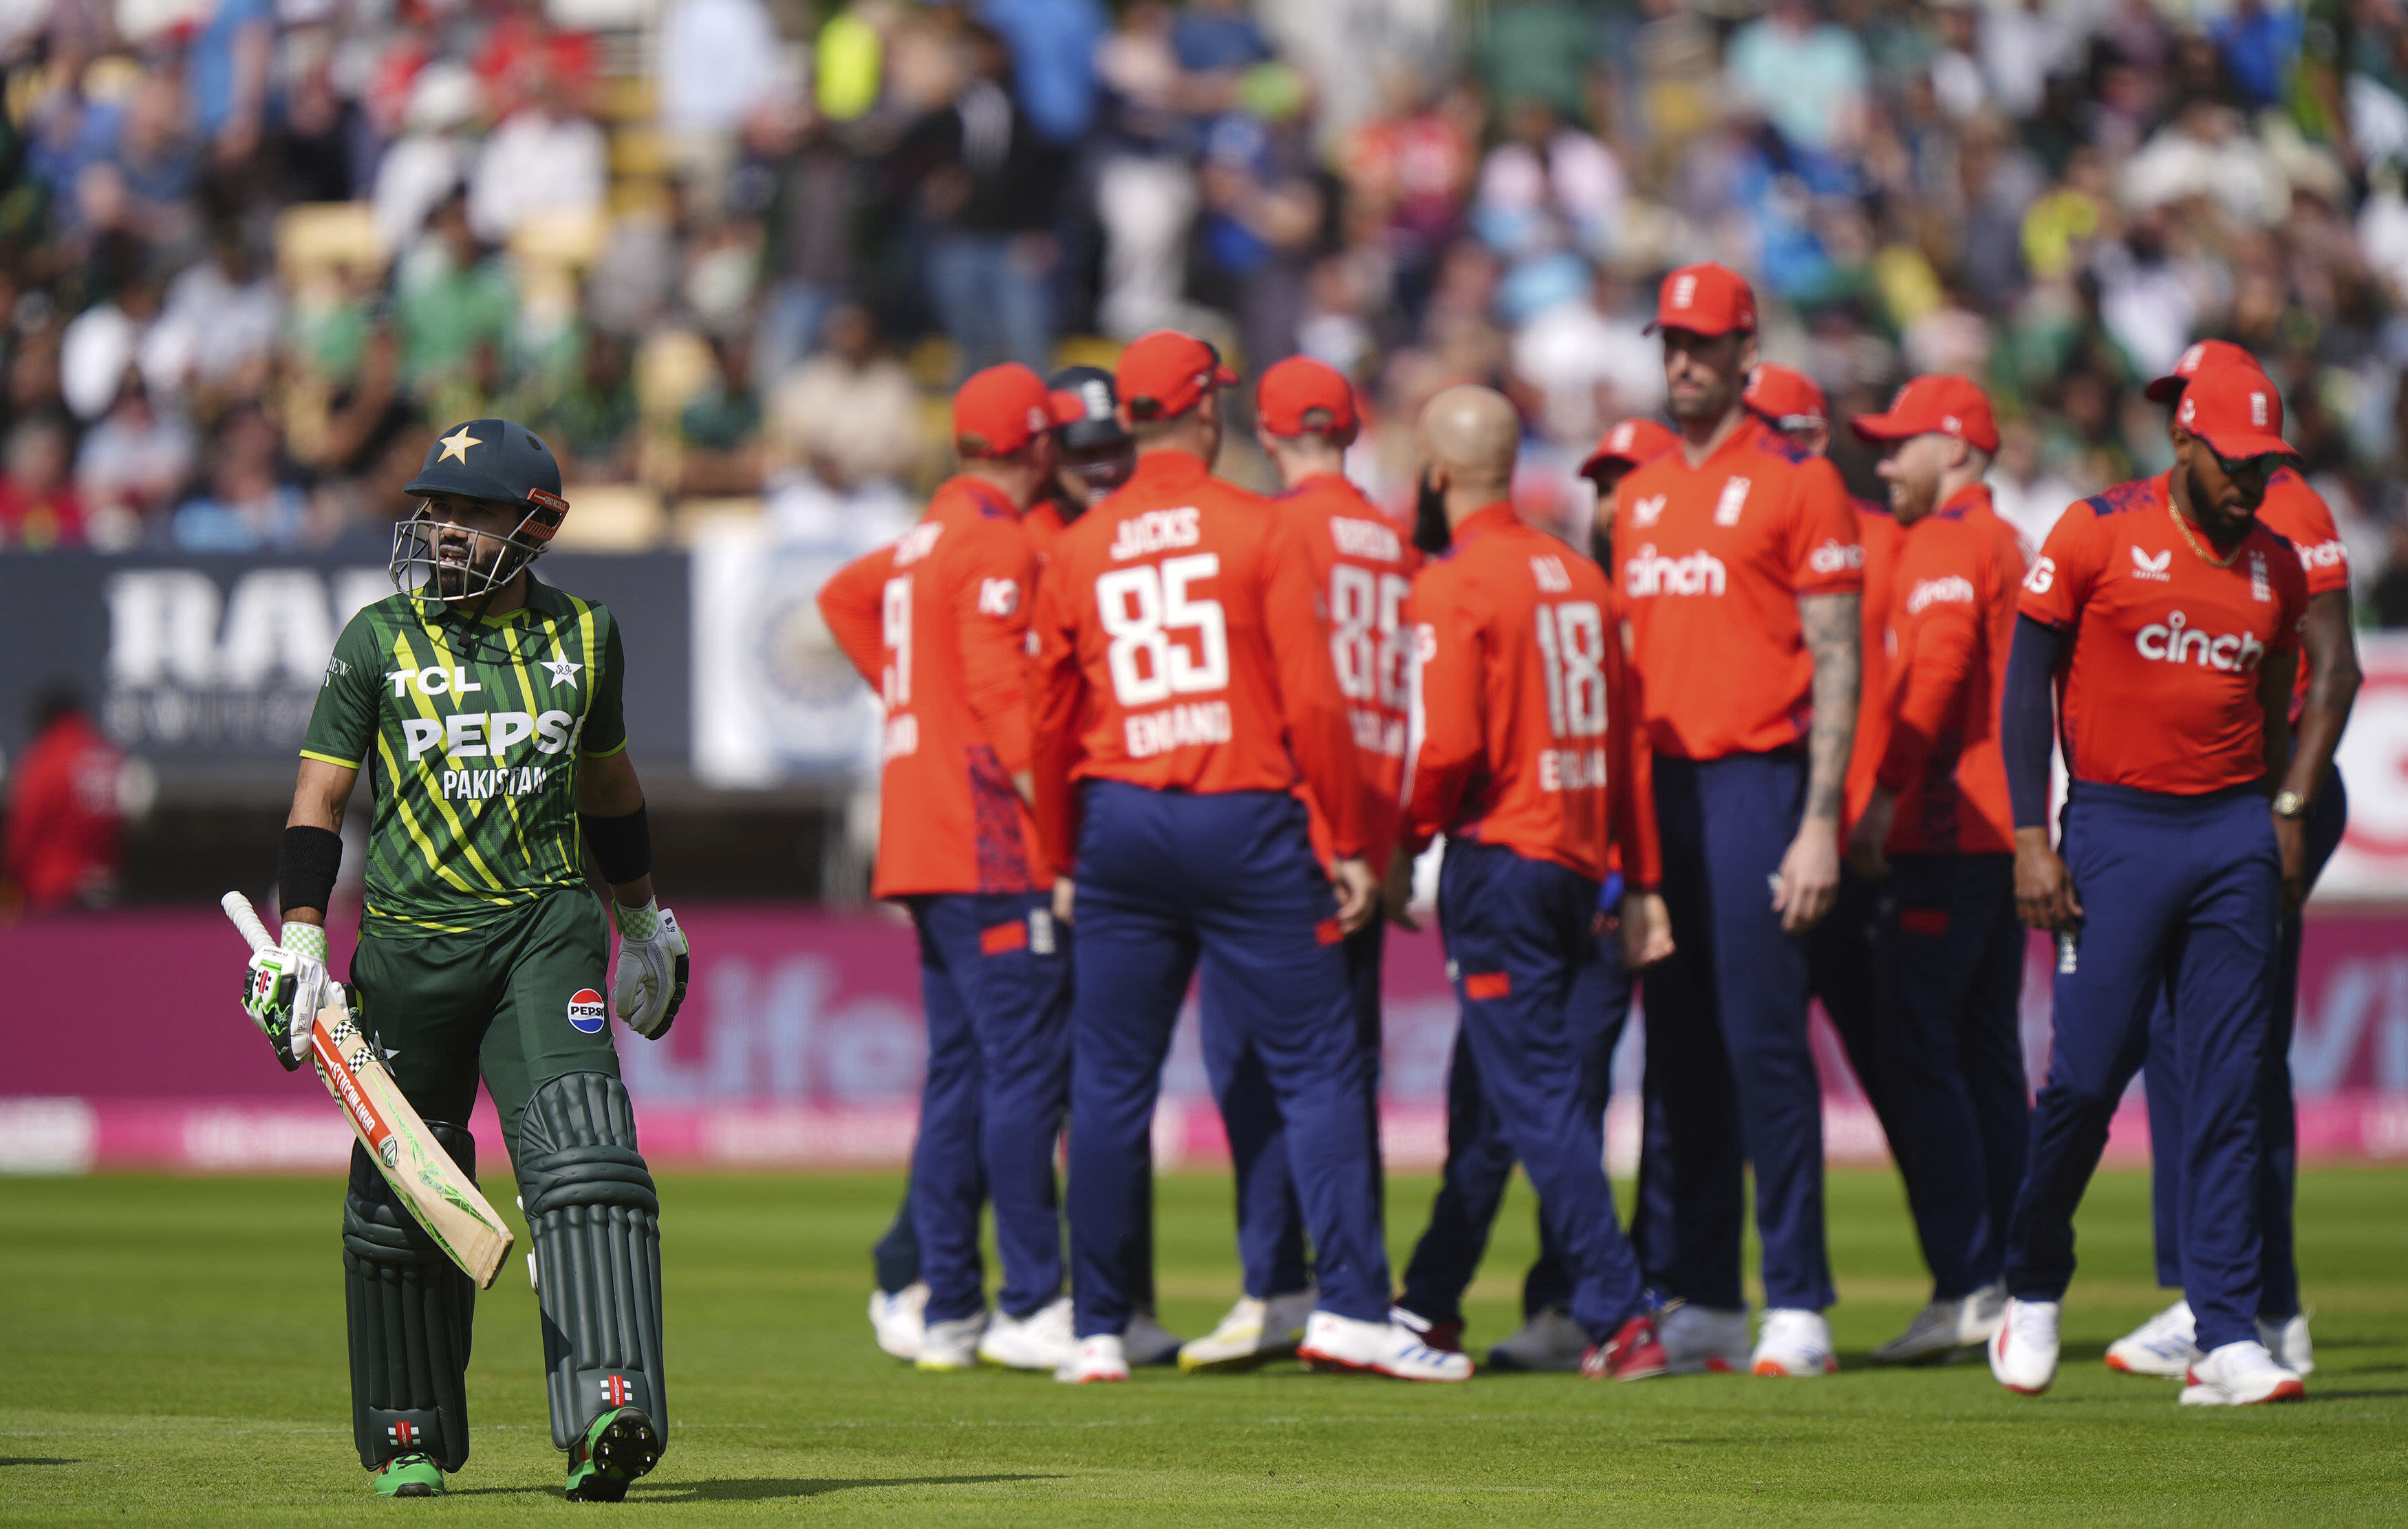 Archer takes 2 wickets on return in England T20 win over Pakistan